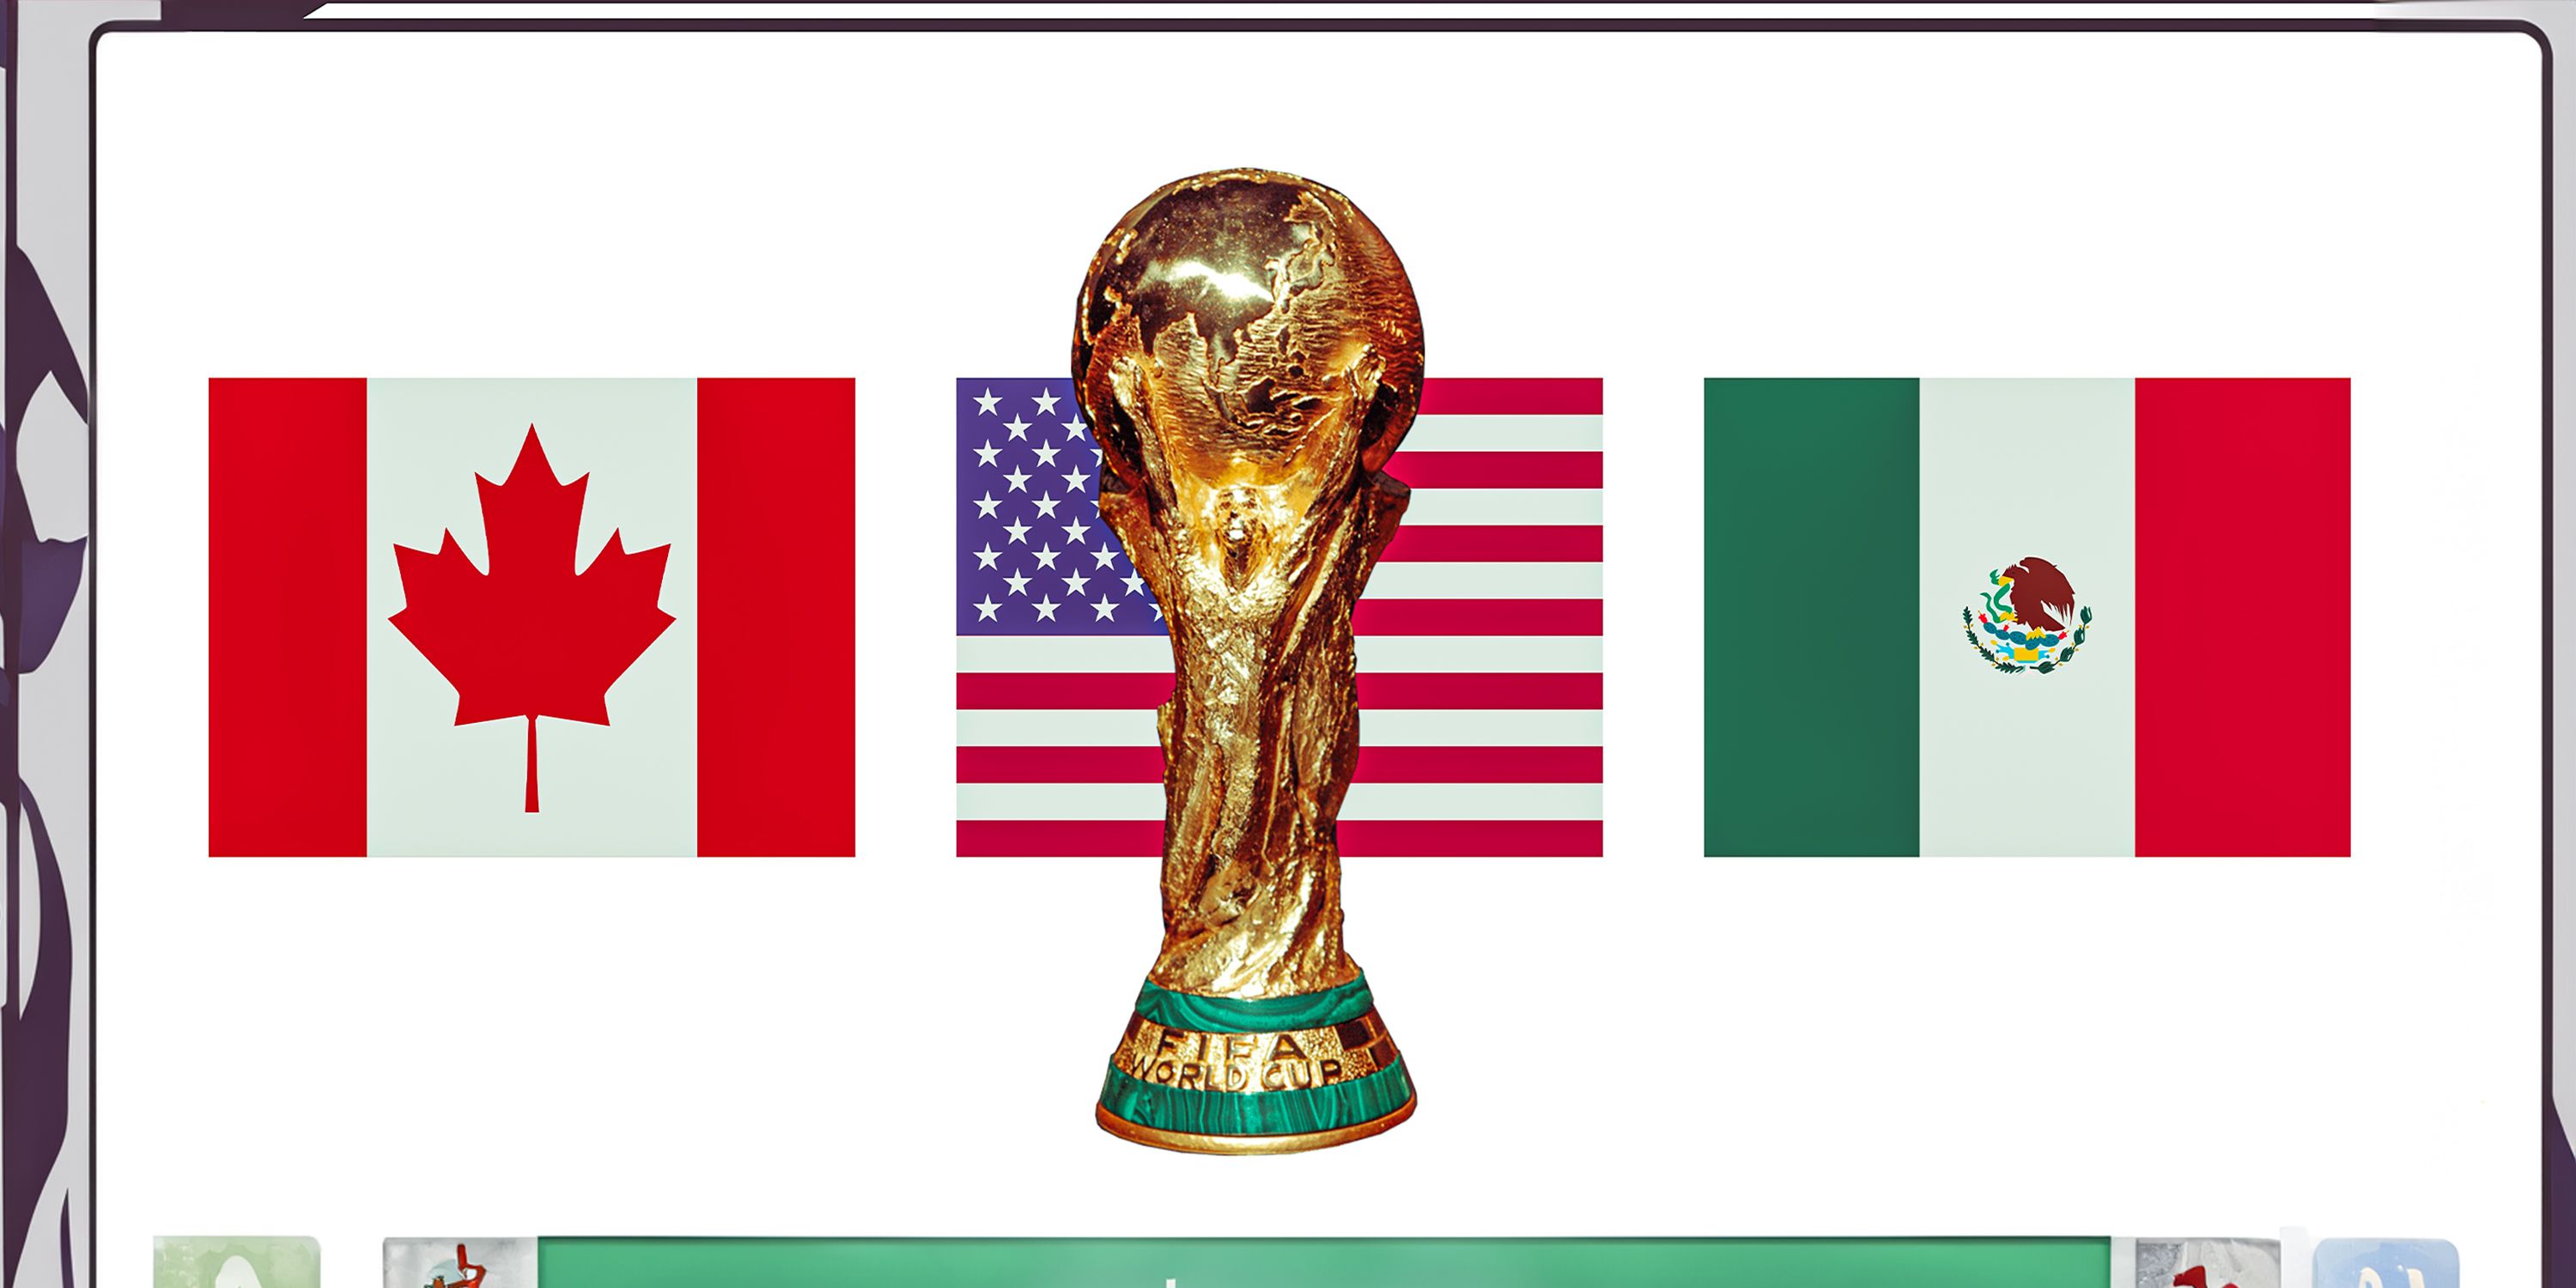 A custom image of the World Cup trophy in front of flags for the host nations at the 2026 tournament, Canada, USA and Mexico